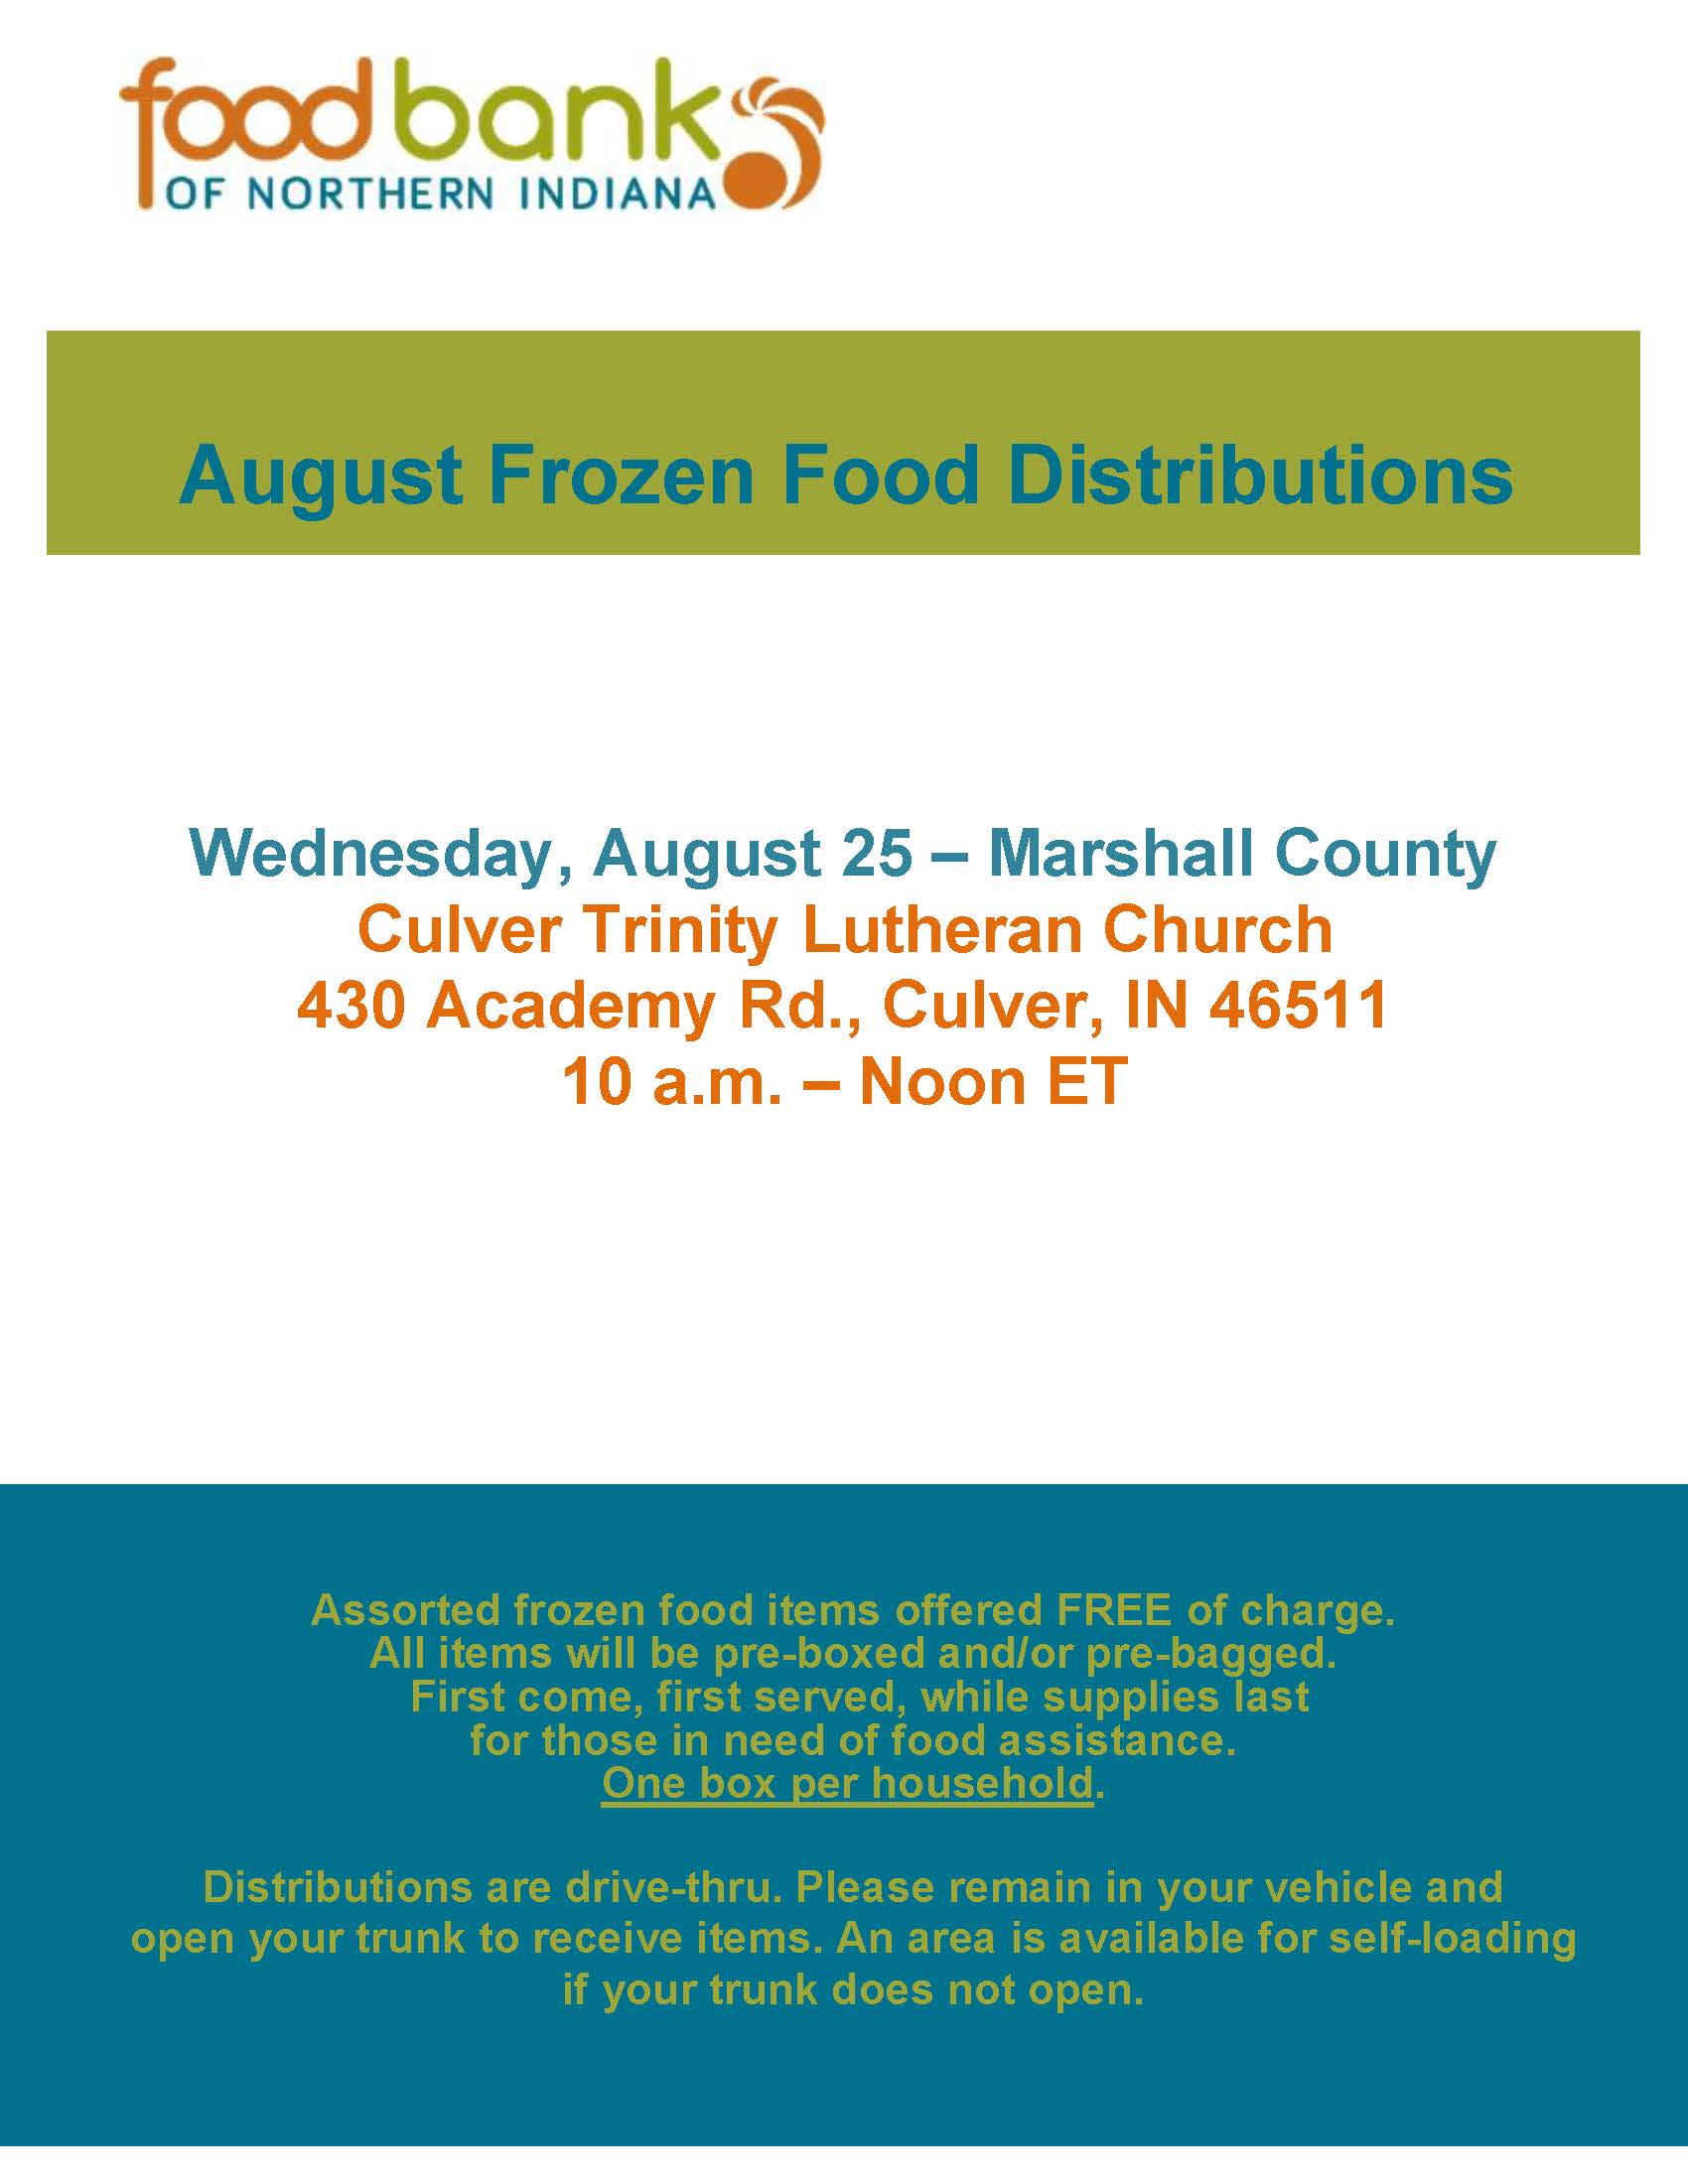 This Wednesday, August 25, there will be a Food Bank of Northern Indiana frozen food mobile distribution at Culver Trinity Lutheran Church.